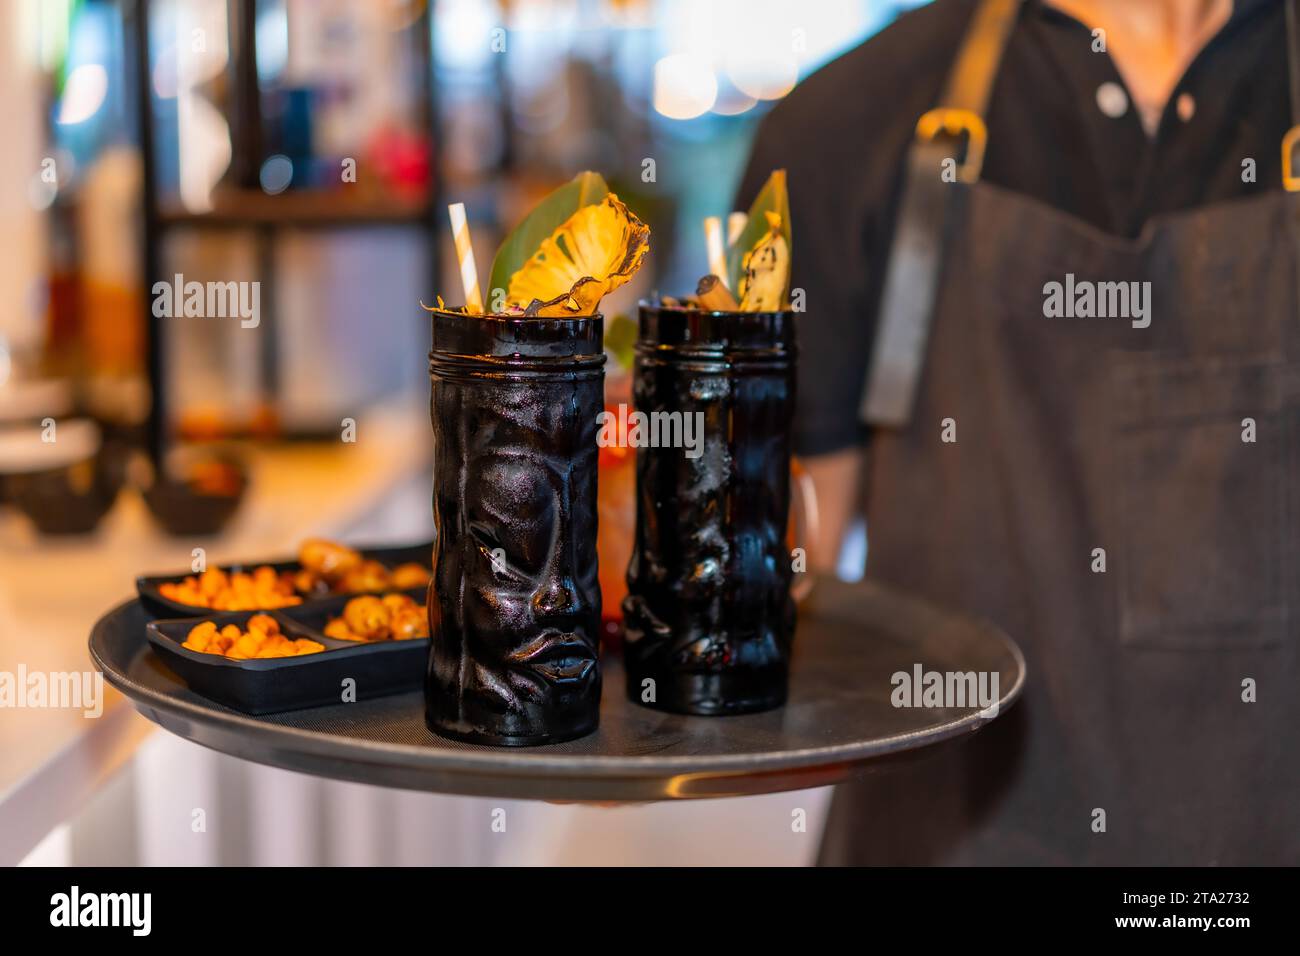 Bartender serving two cocktails in dark glasses in a plate in a night bar Stock Photo